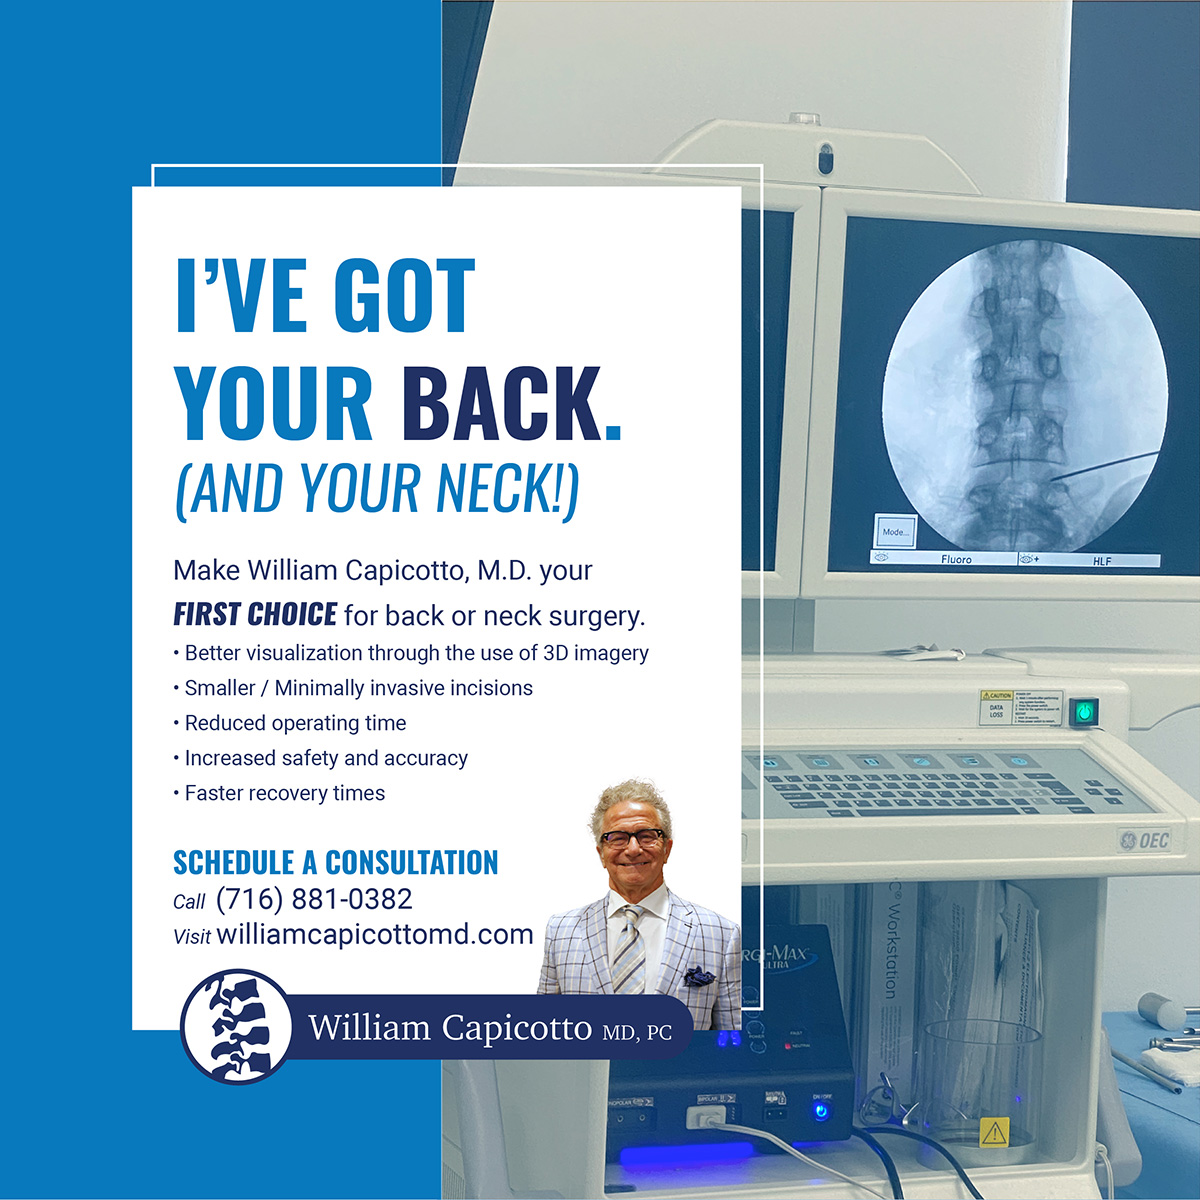 As a leading spine surgeon, Dr. William Capicotto, M.D. offers both surgical and nonsurgical treatments to restore movement. Learn more about our neck and spine surgery services.